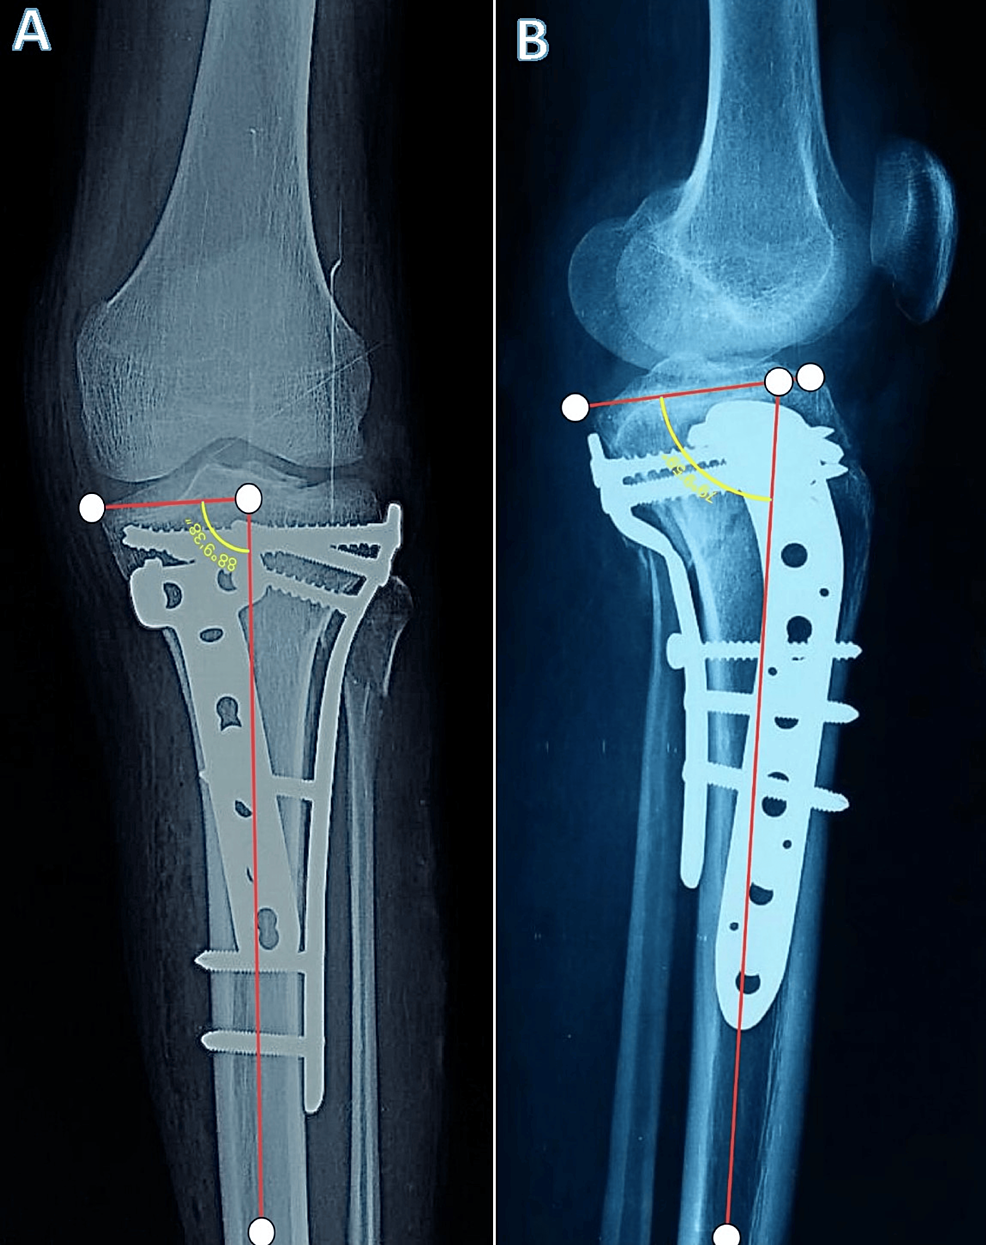 The Comparative Analysis of Single Plating Versus Double Plating in the Treatment of Unstable Bicondylar Proximal Tibial Plateau Fractures